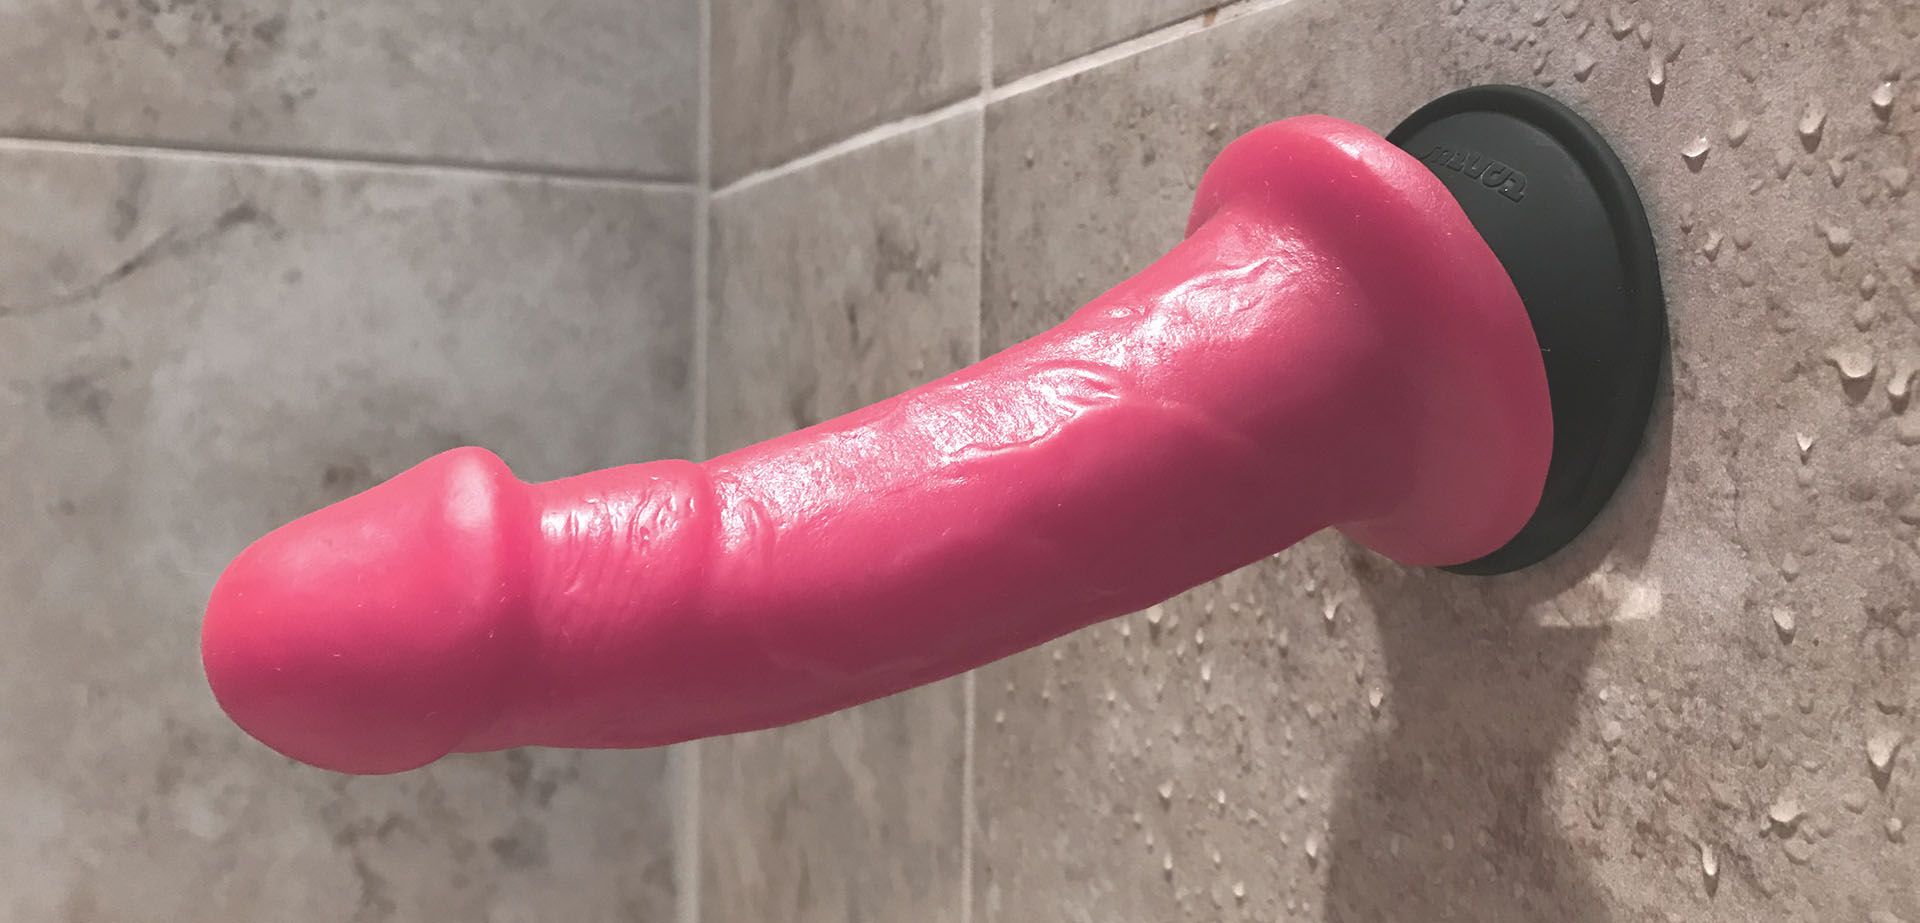 suction cup dildo for shower hd porn pic